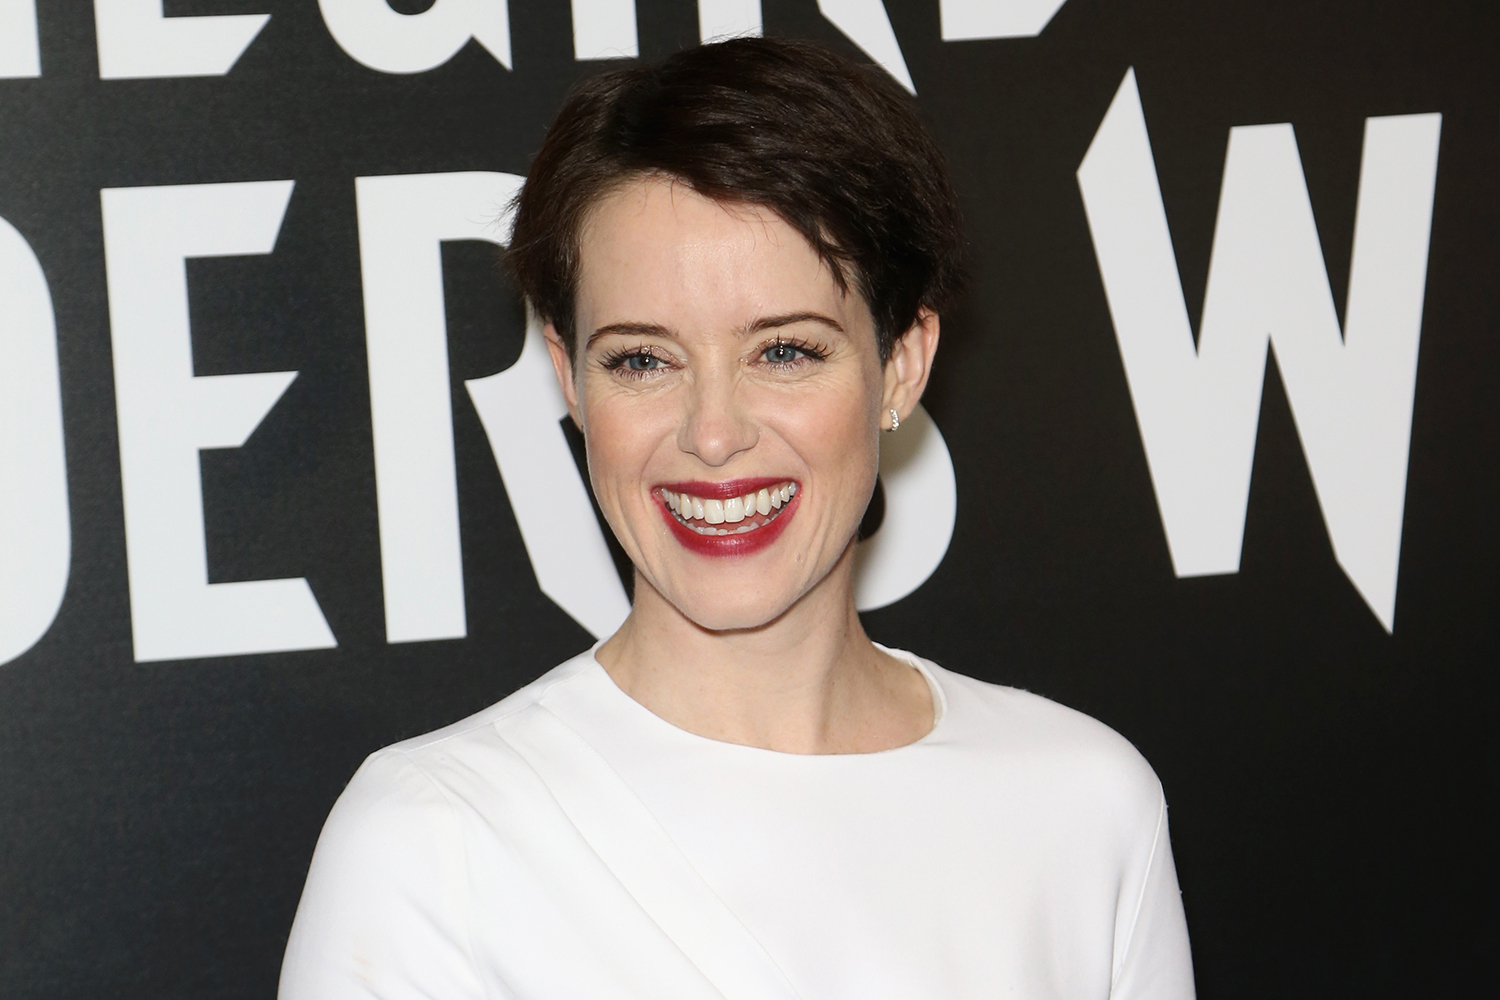 Claire Foy Says The Crown’s Pay Gap Scandal “Has Really Opened My Eyes”